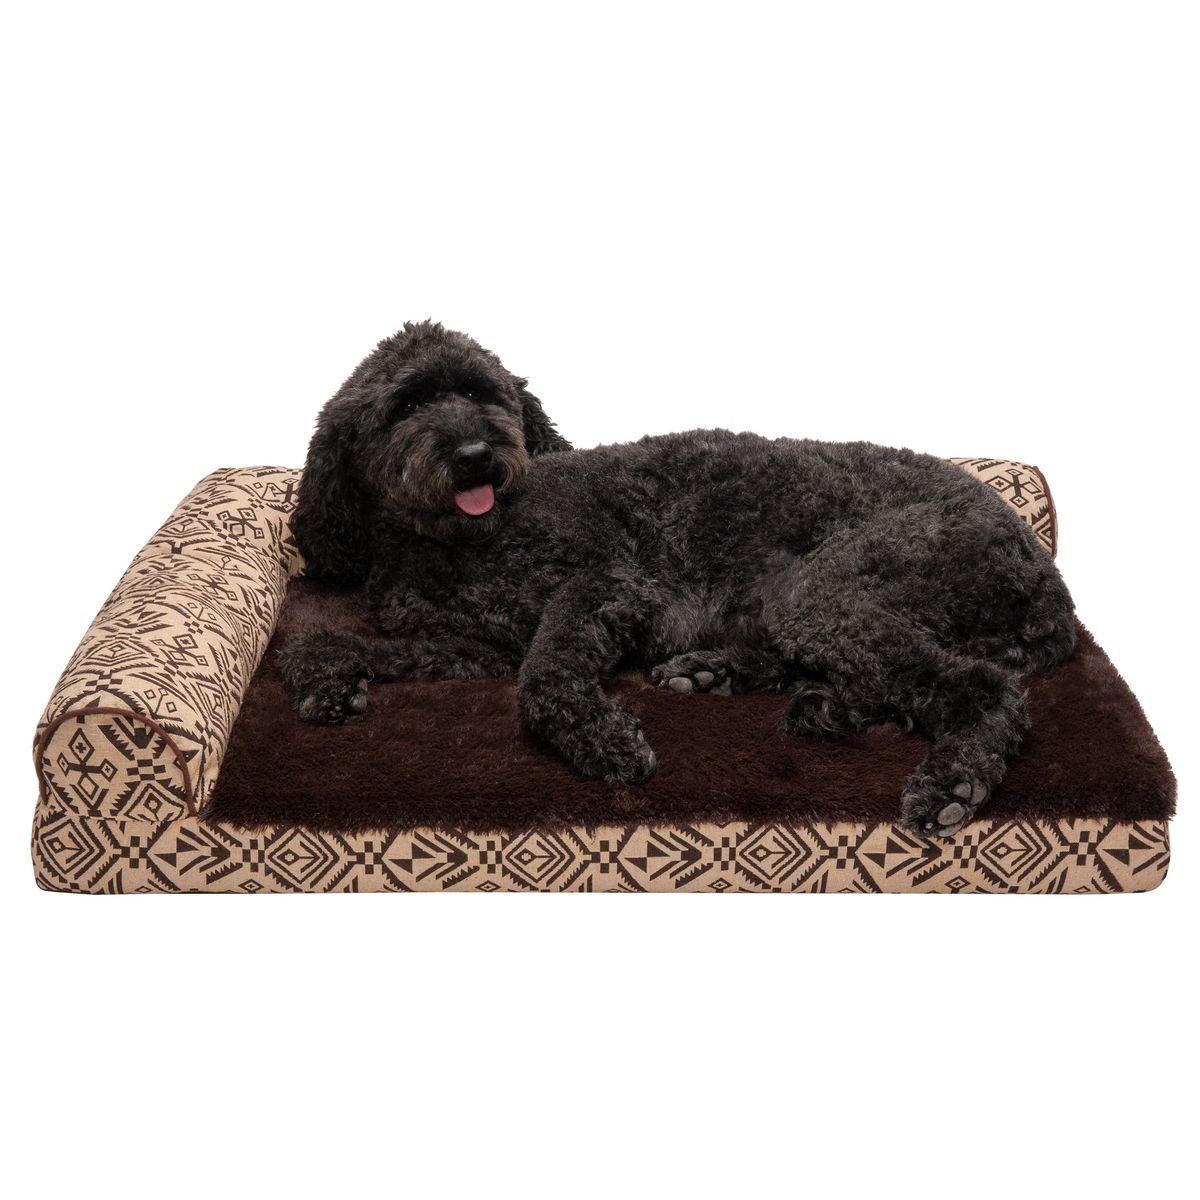 Photos - Bed & Furniture Furhaven Pet Products Deluxe Southwest Chaise Lounge Dog Bed - Memory Foam